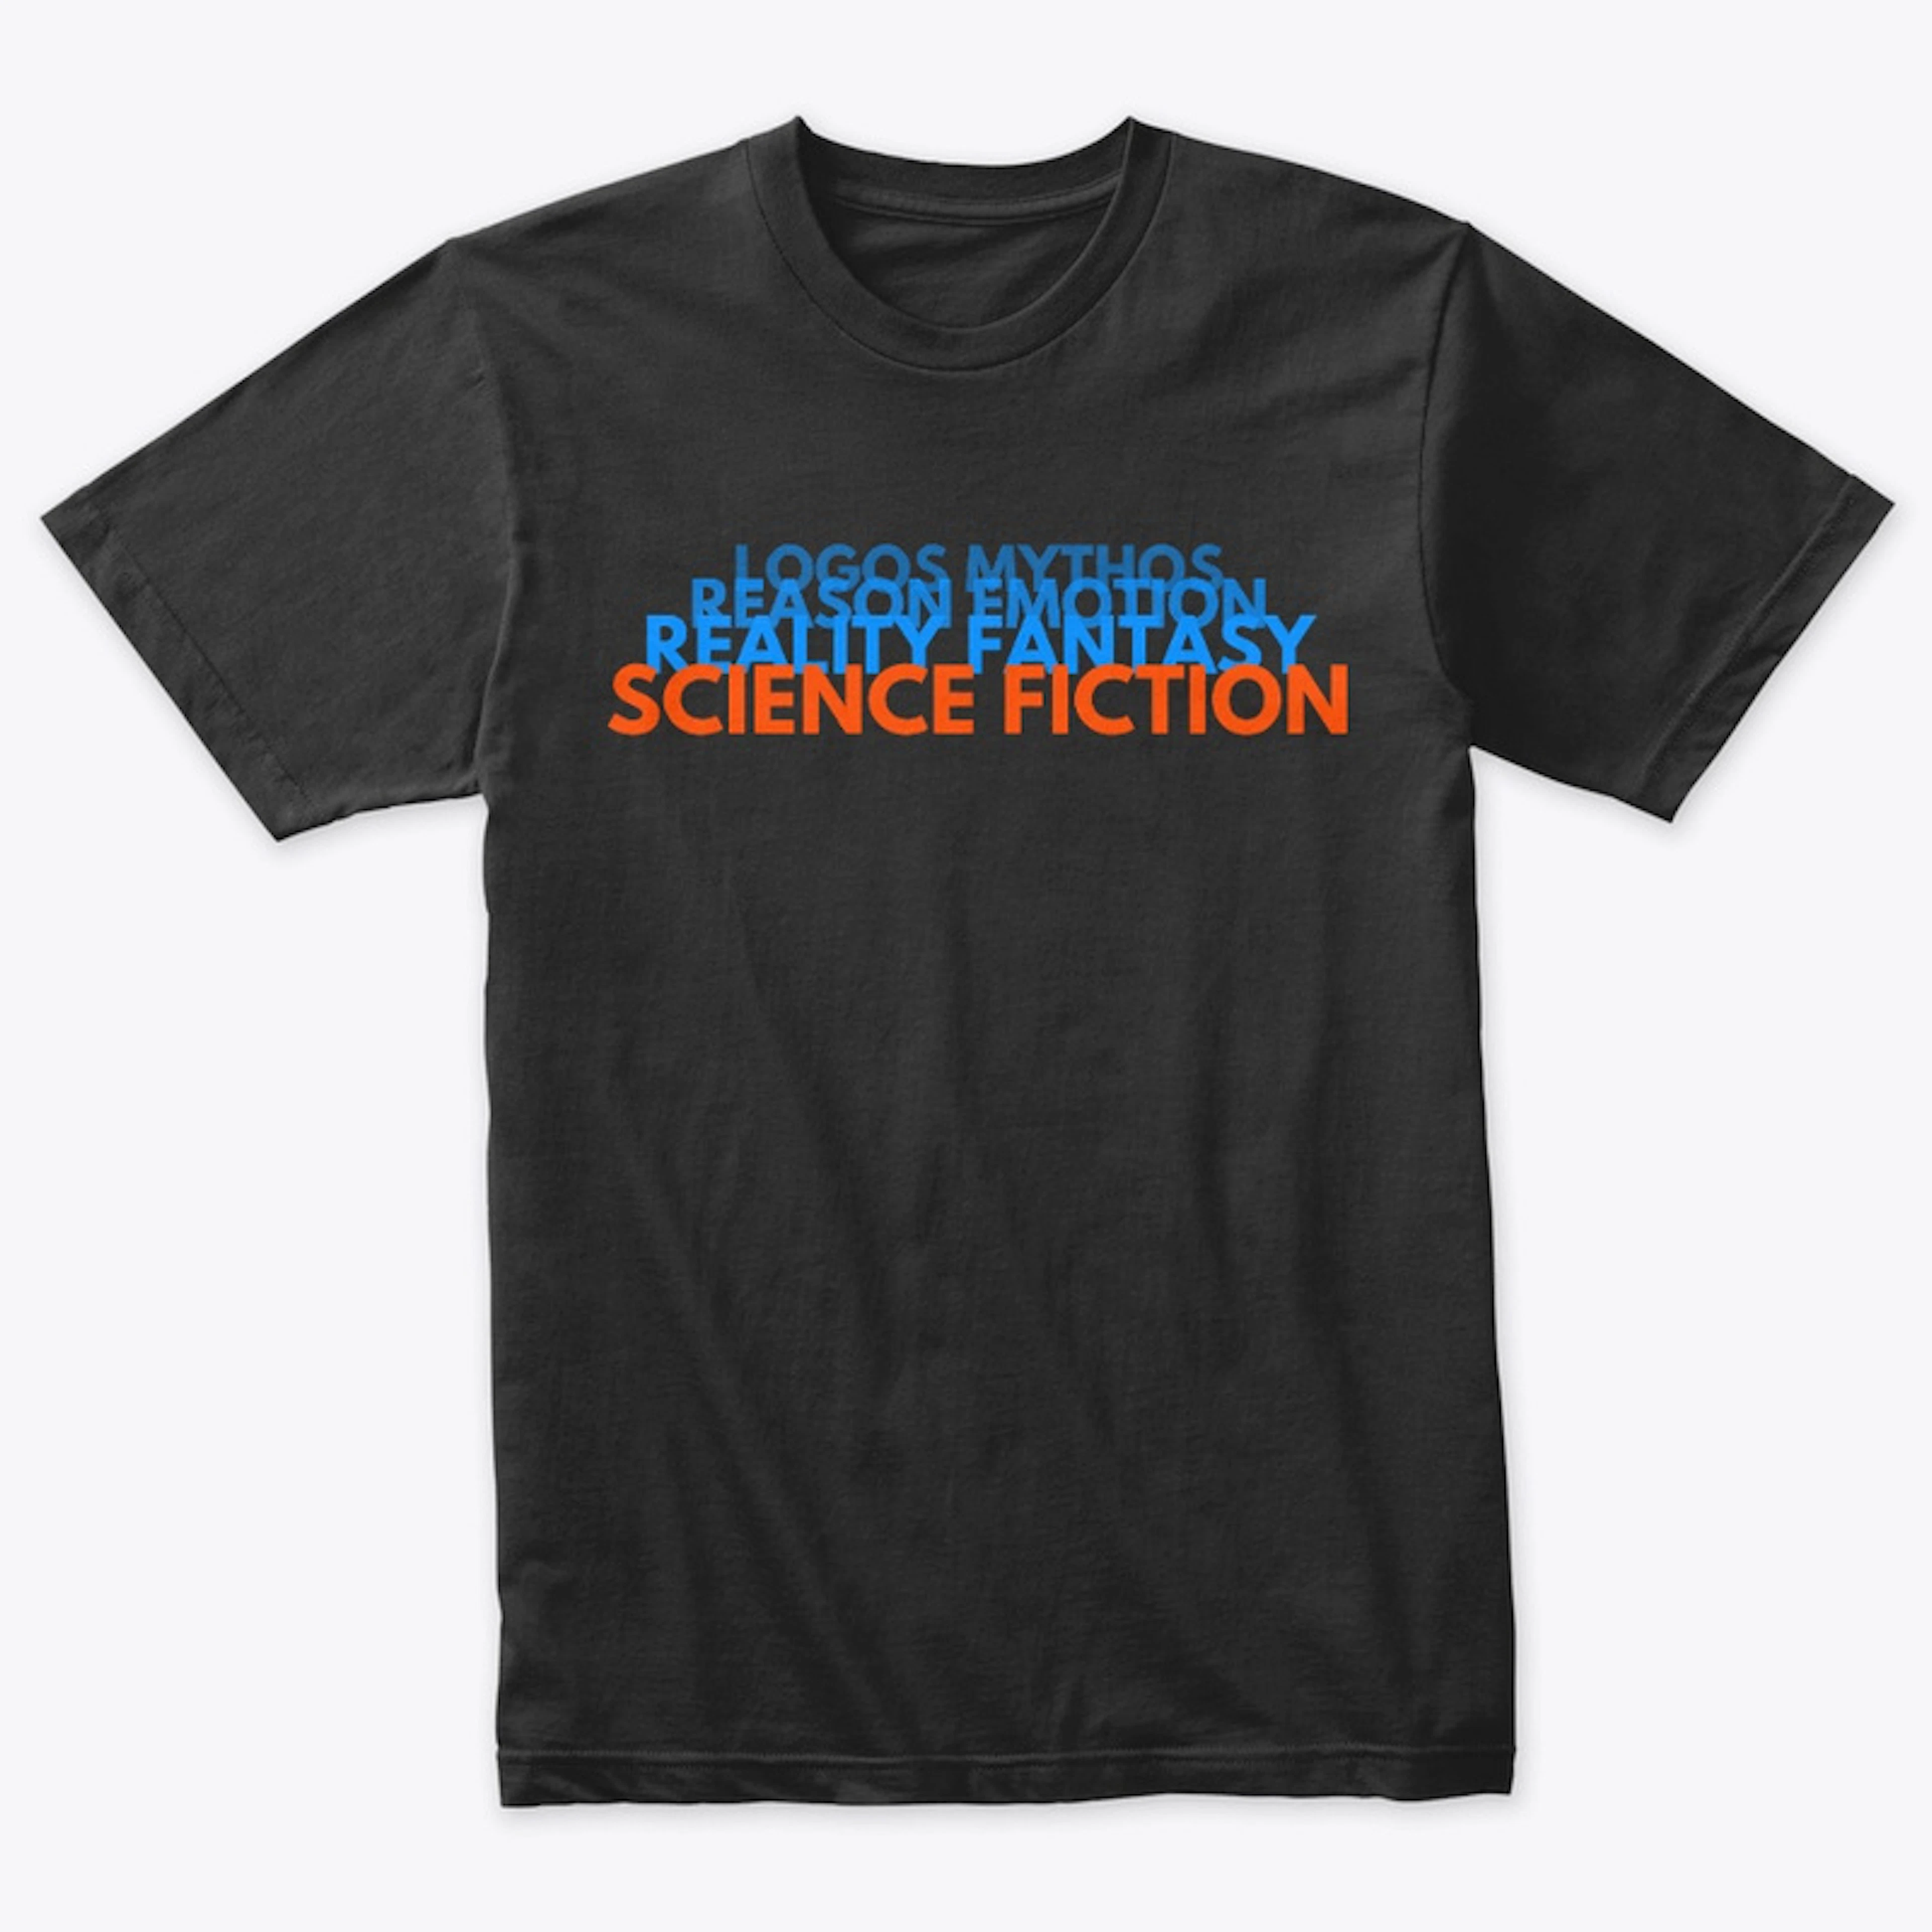 Science Fiction - tee shirt collection